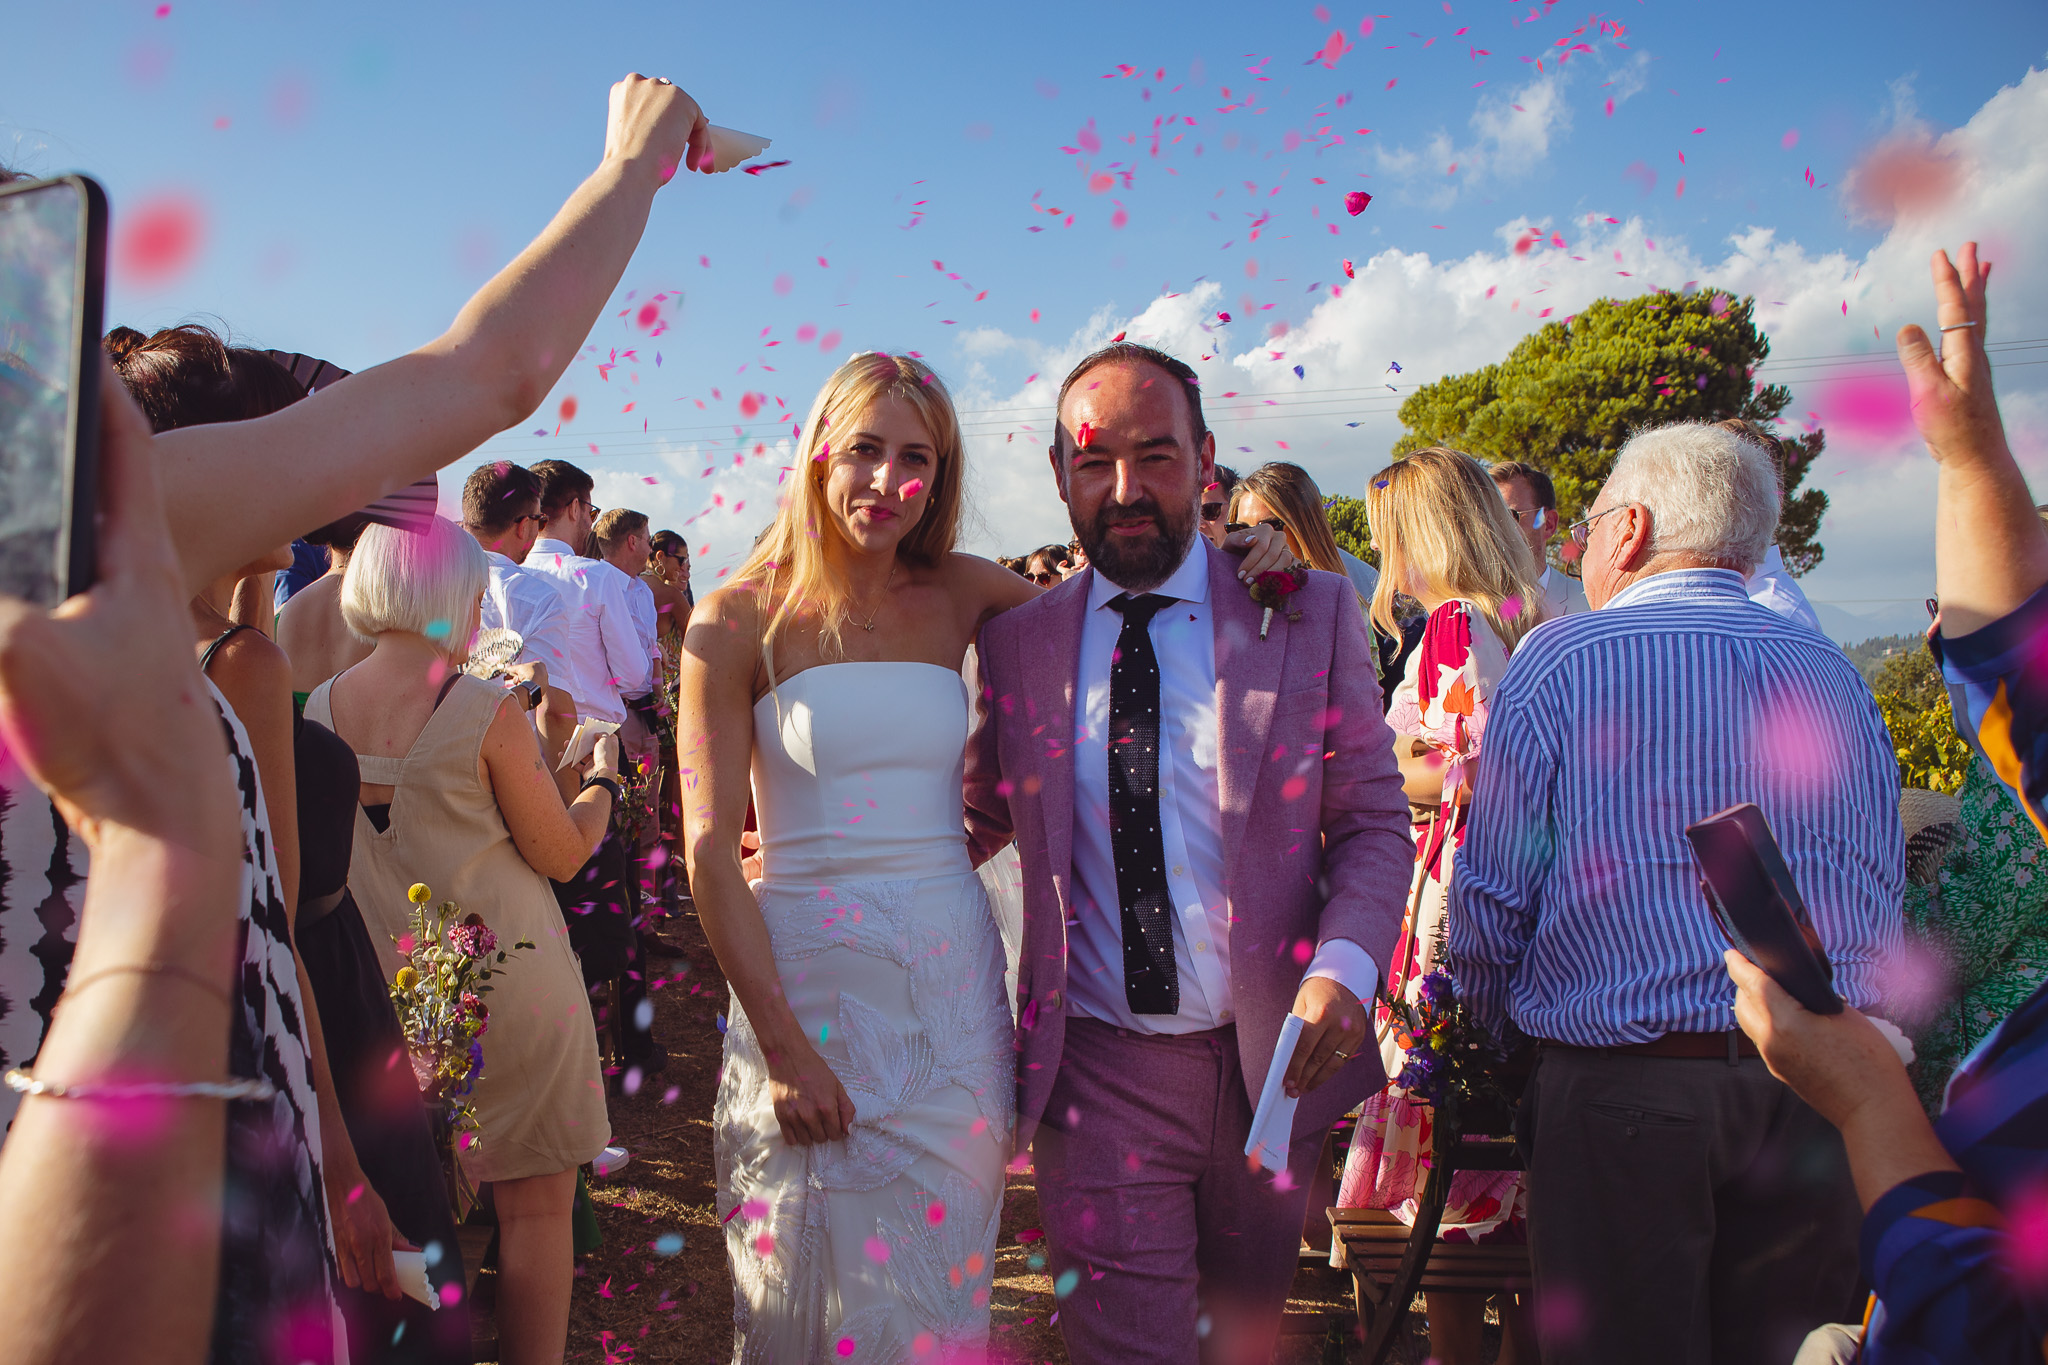 Guests throw pink confetti at the bride and groom who are walking down the aisle at the wedding ceremony